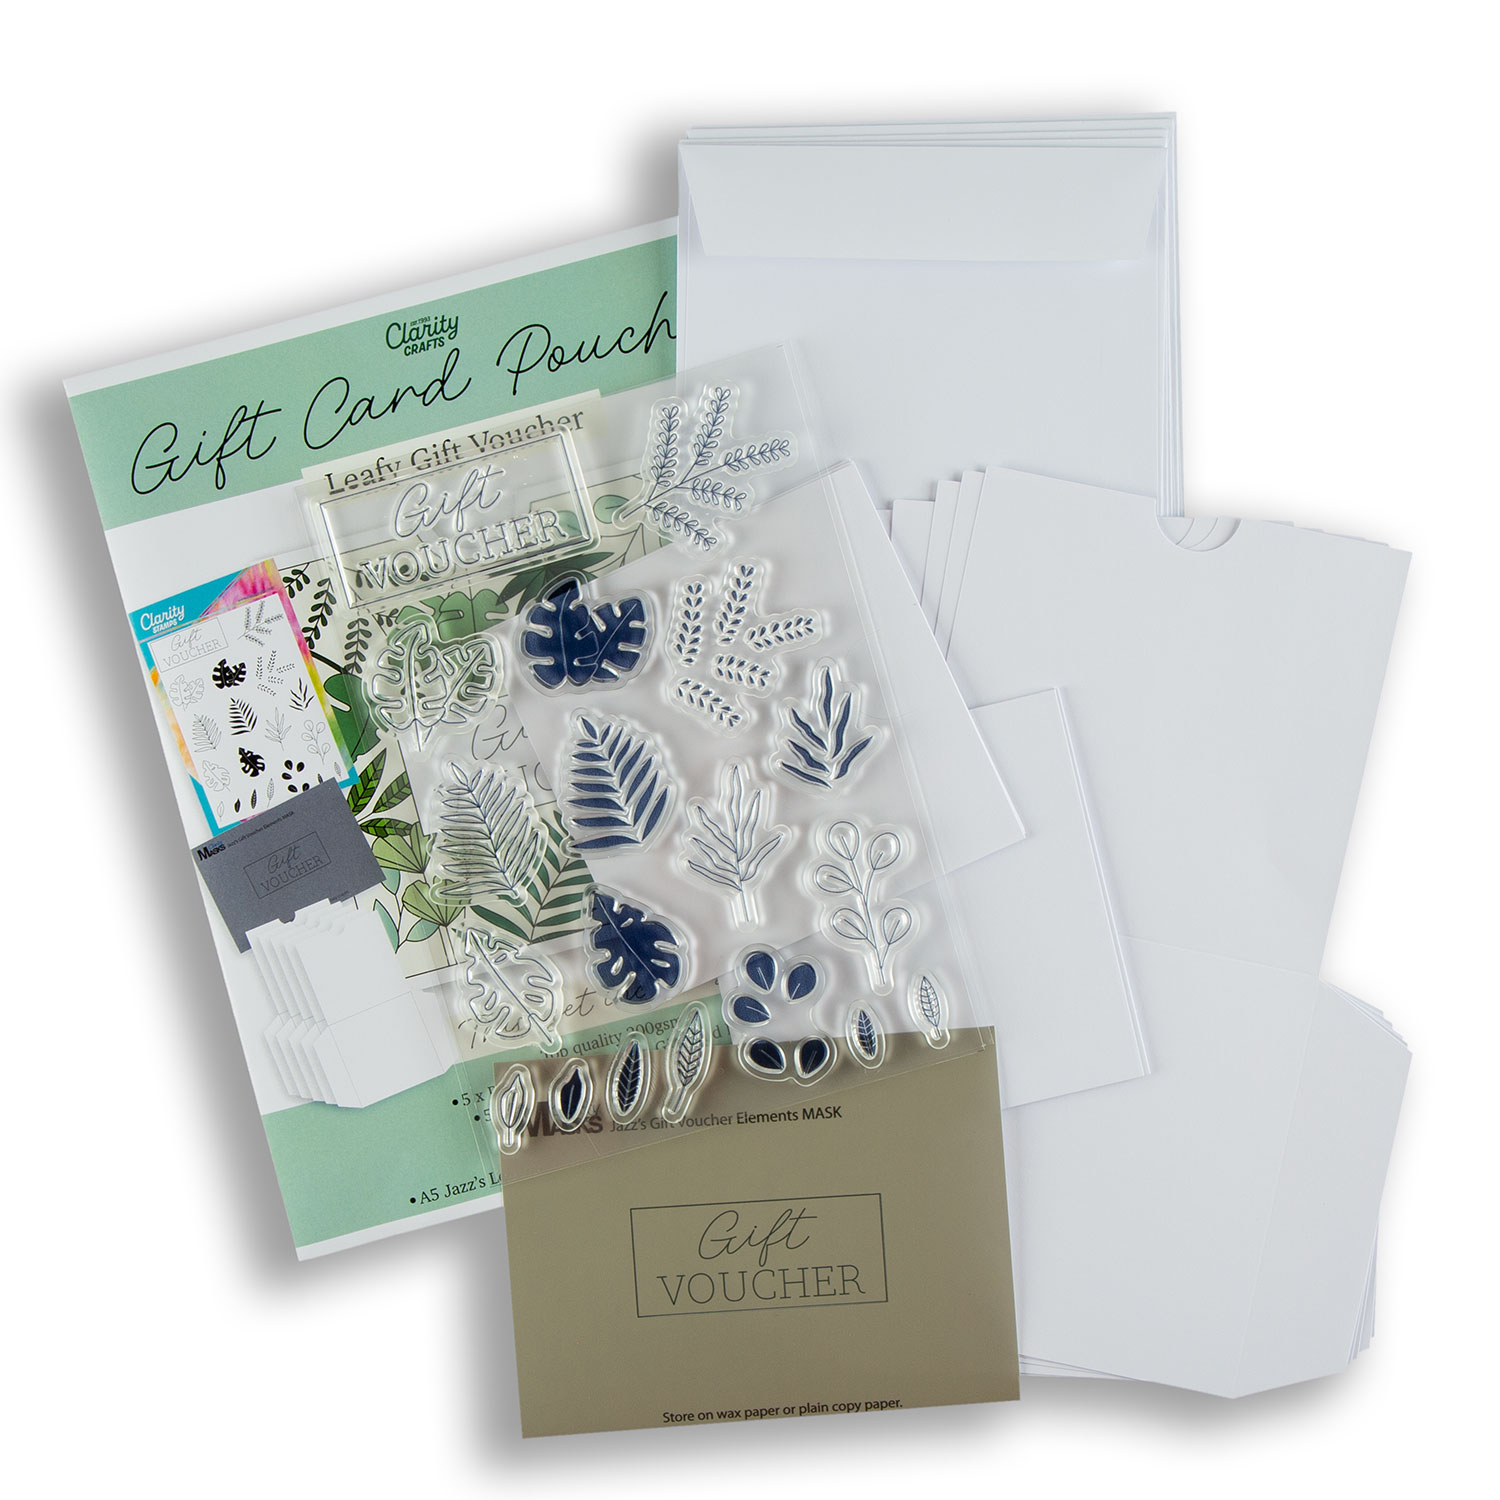 Clarity Crafts Voucher Pouch A5 Stamp & A6 Mask Set with Die Cut Wallets & Envelopes Pick-n-Mix - Choose 2 - Jazz's Leafy Gift Voucher Elements 